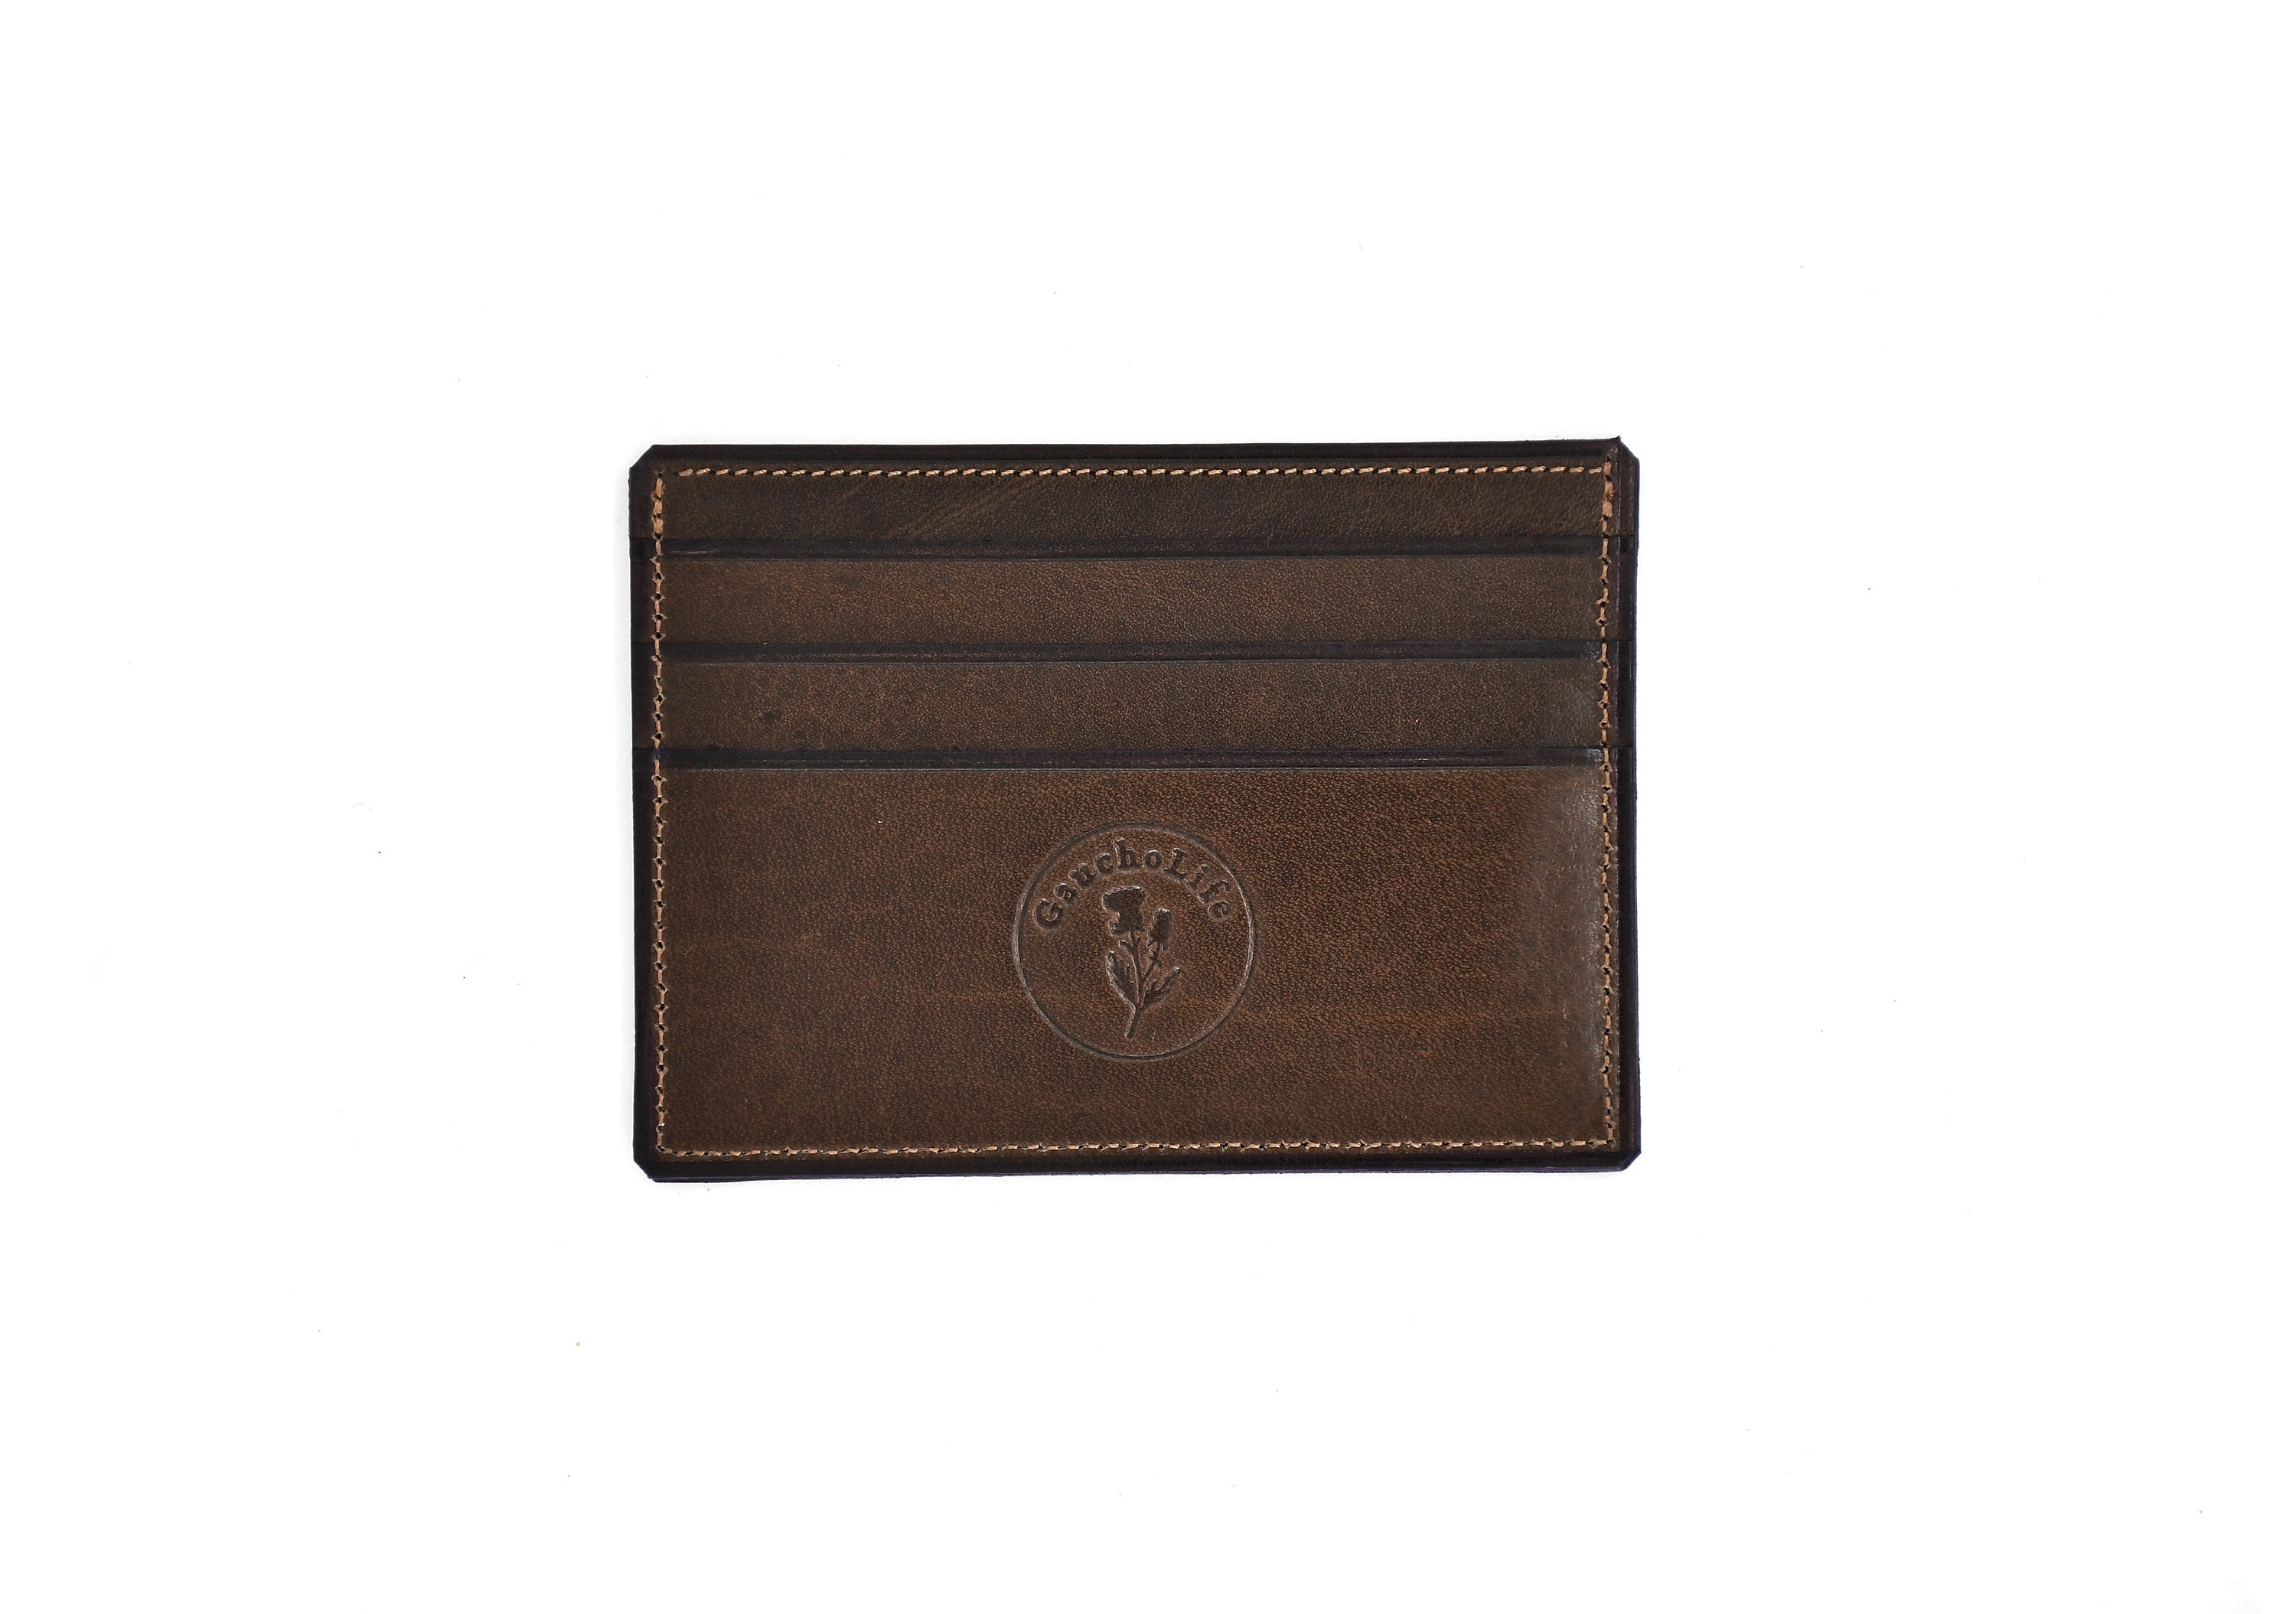 LEATHER WOVEN CARDHOLDER